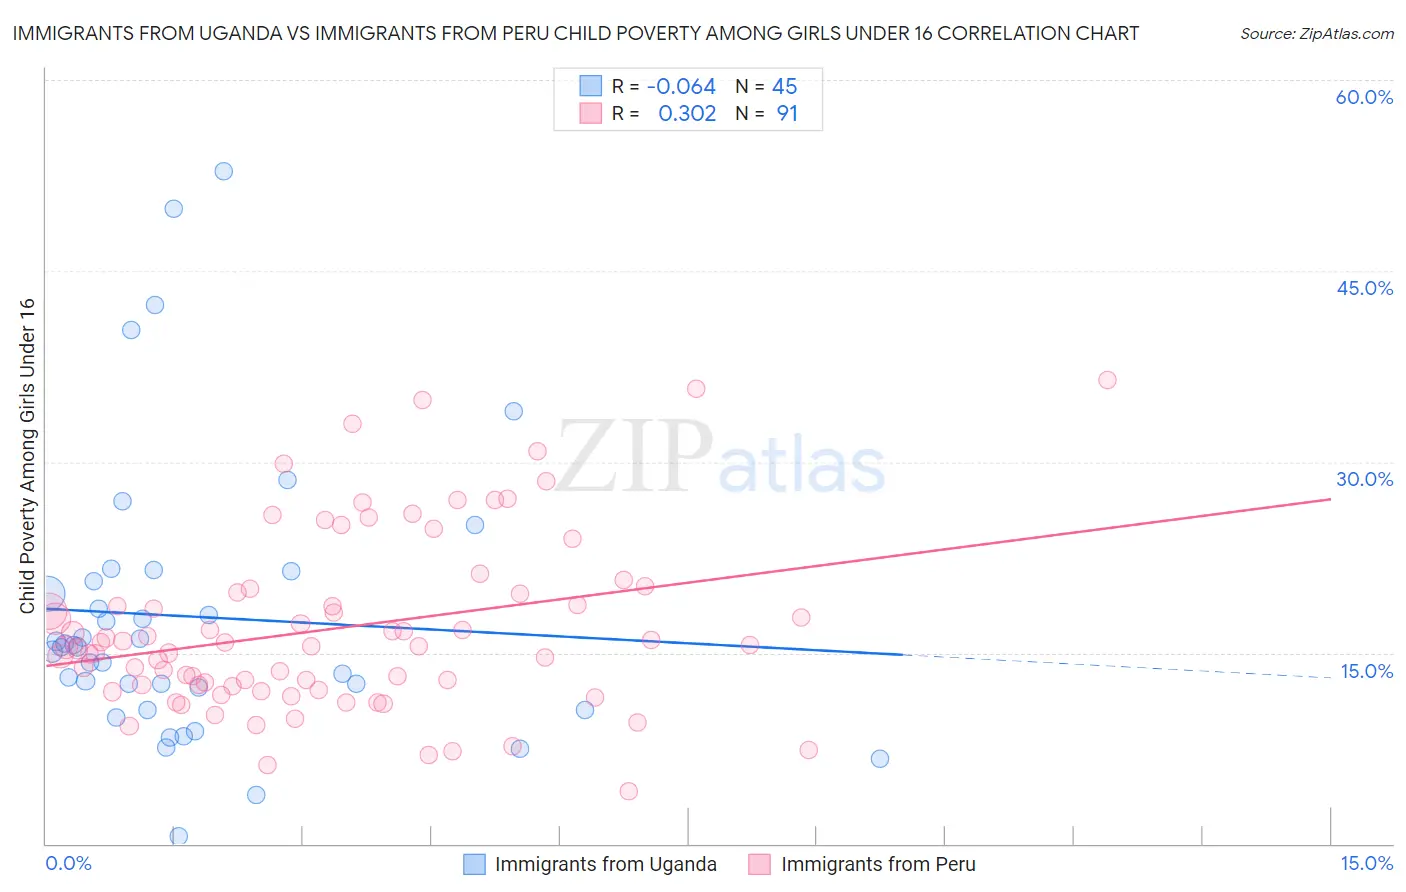 Immigrants from Uganda vs Immigrants from Peru Child Poverty Among Girls Under 16